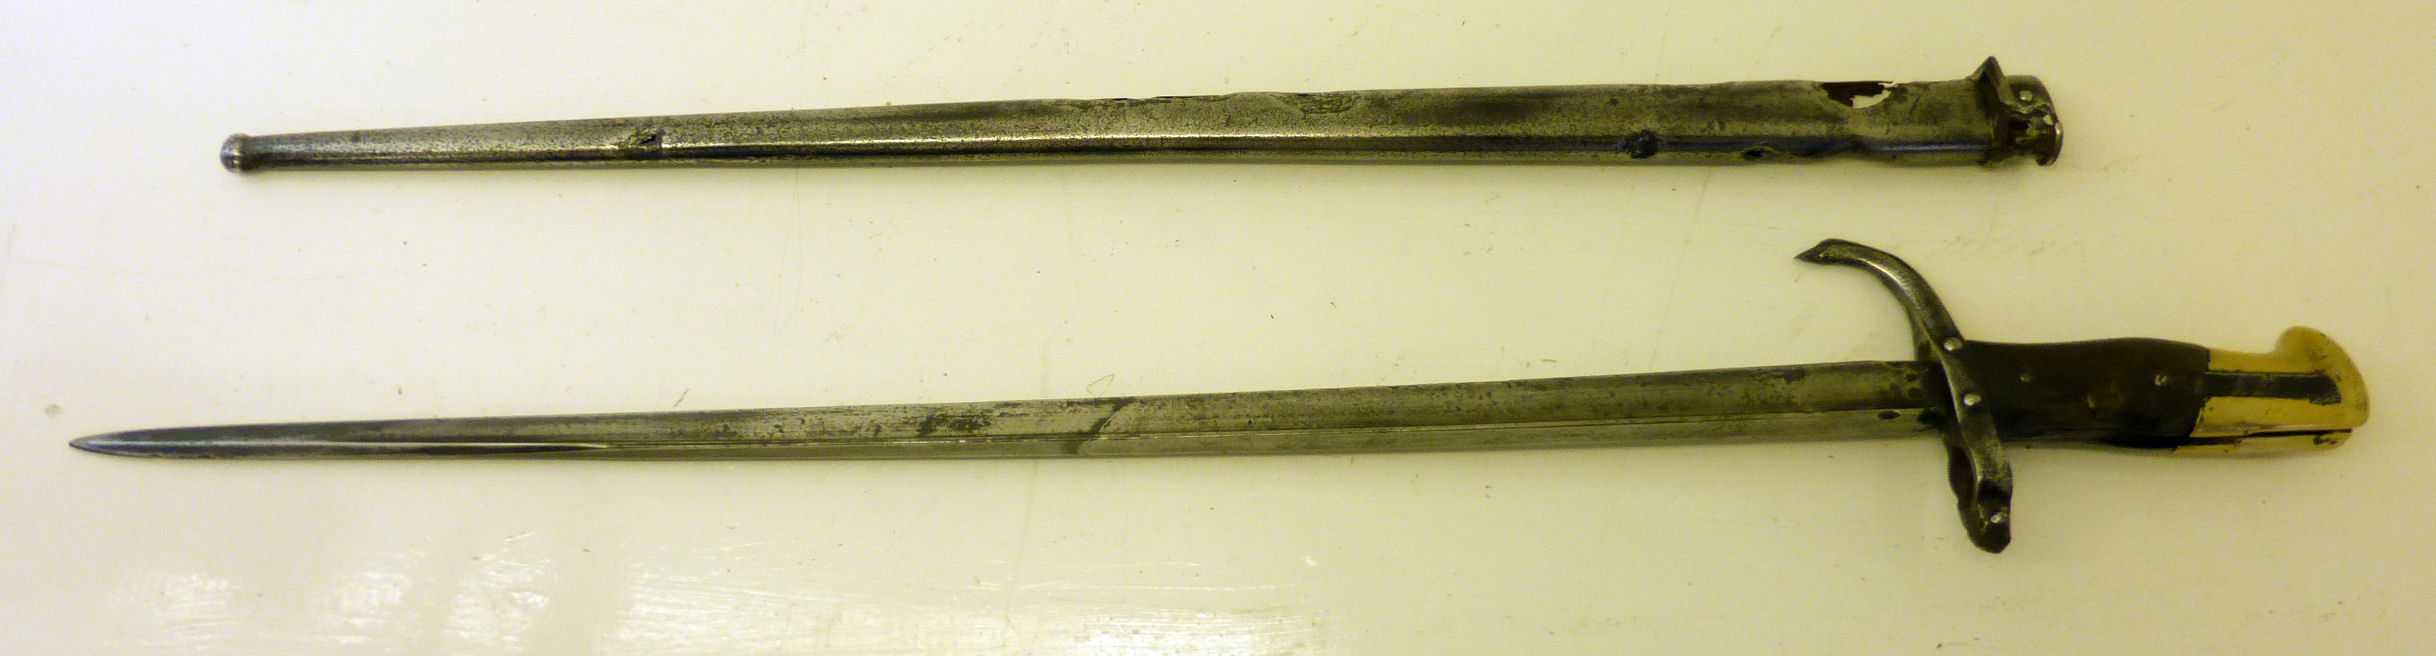 A Victorian 1845 pattern Sword for Indian Service, the engraved blade and brass hilt both - Image 3 of 4